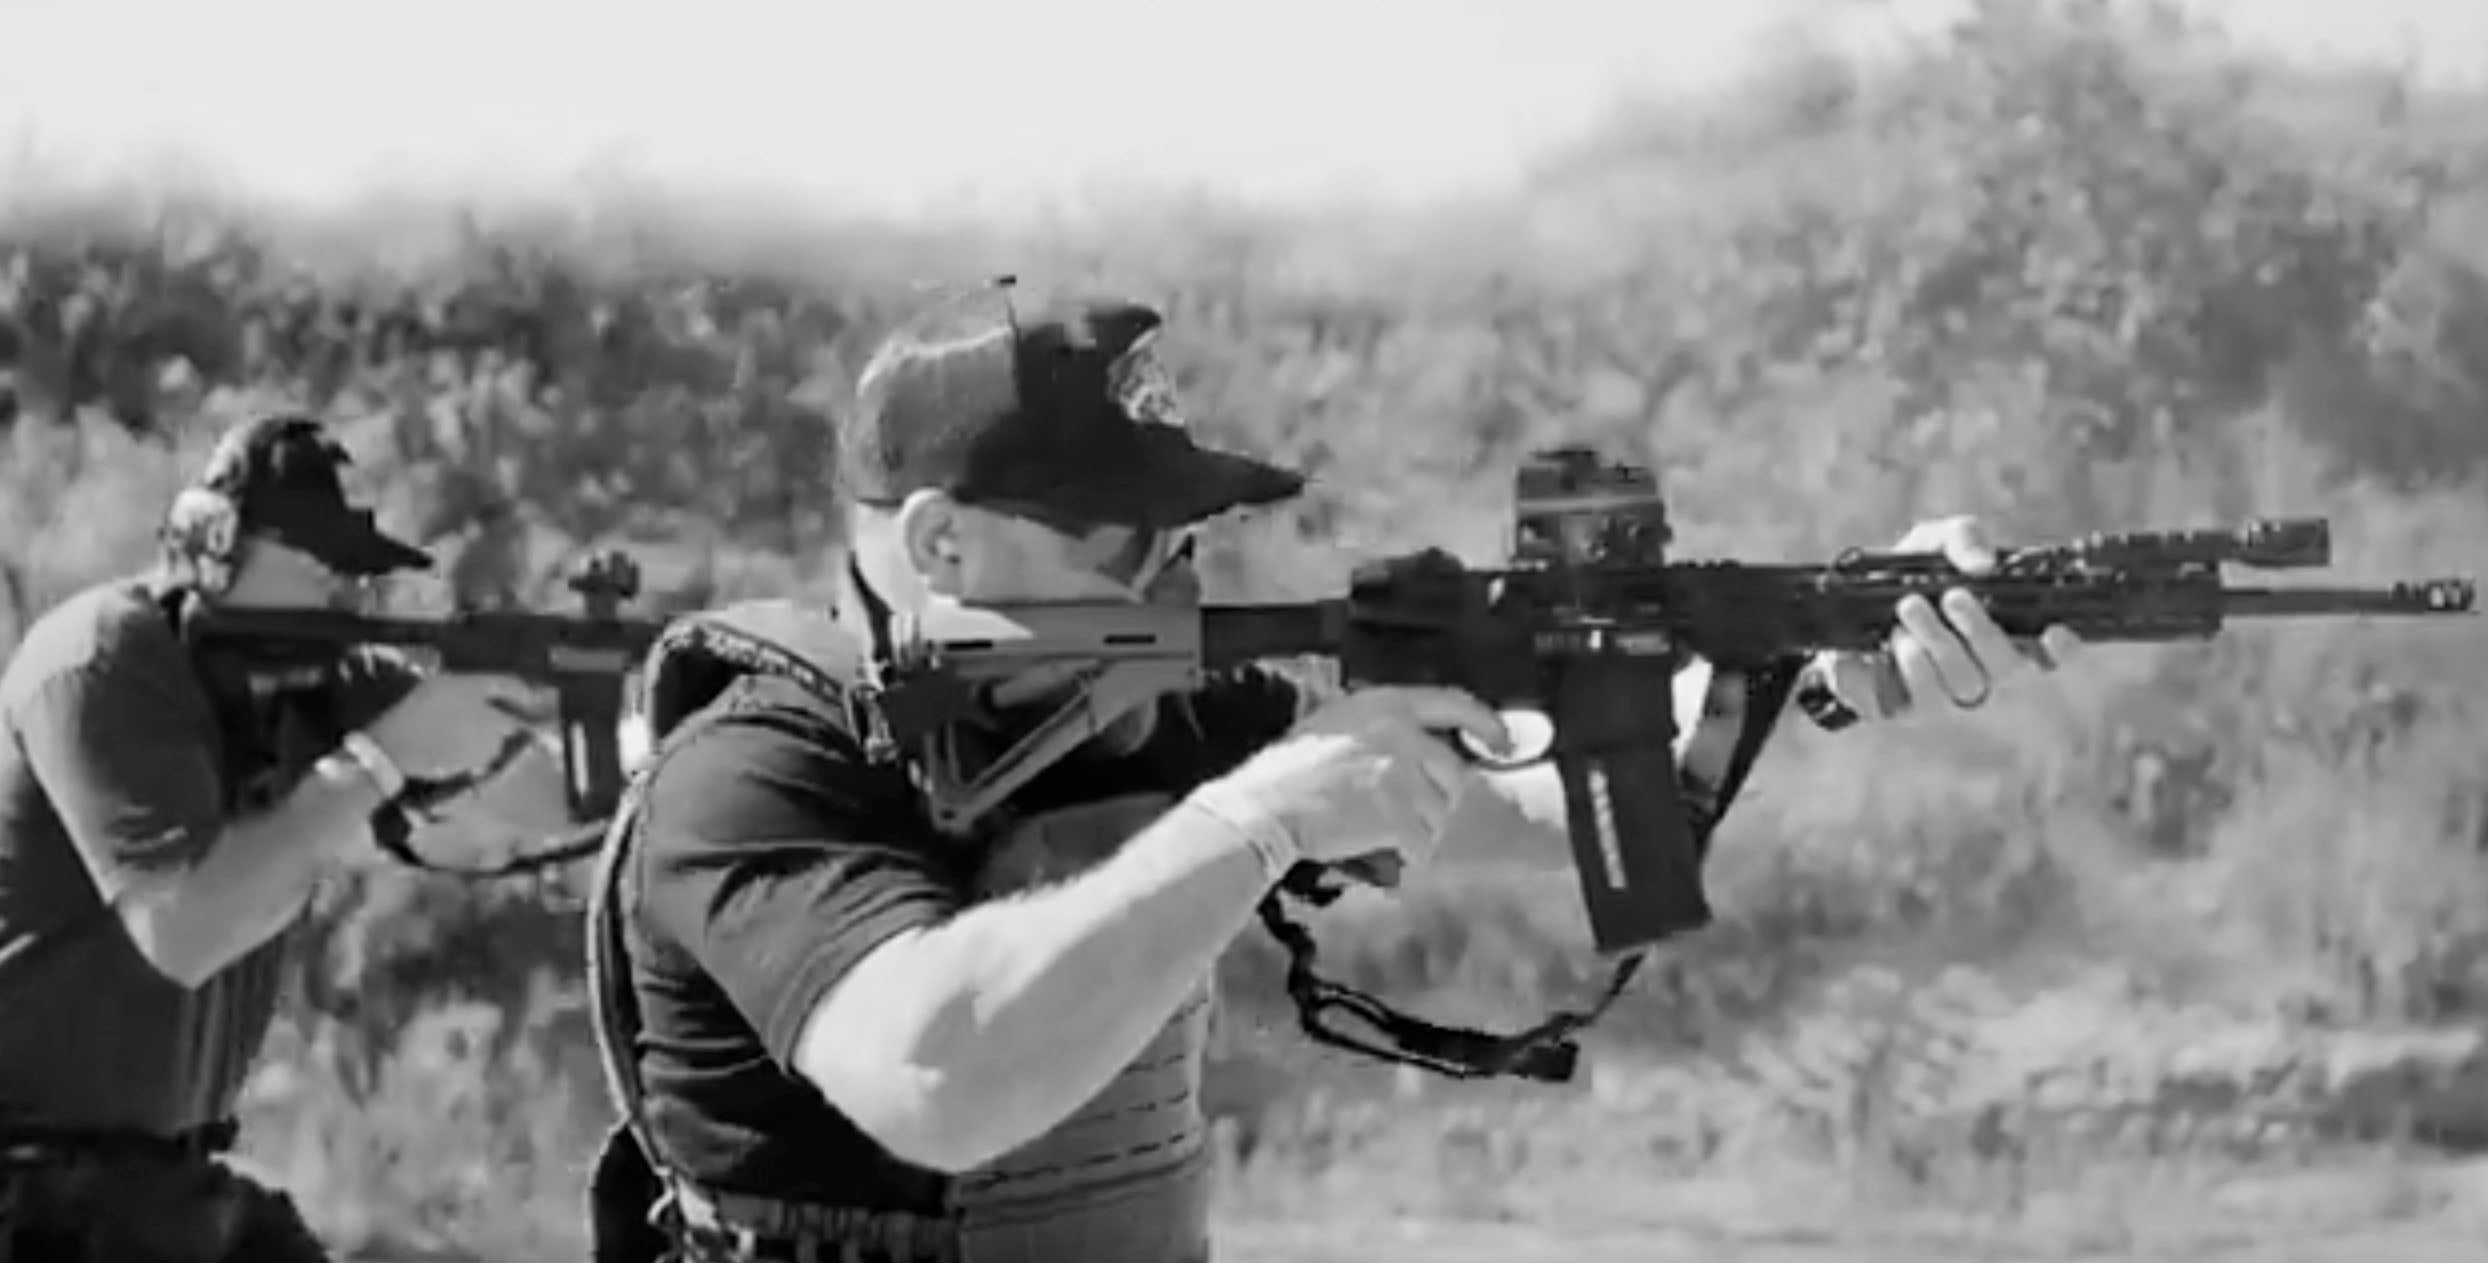 Load video: Day at the range, private range day, video students shooting and moving, reloading